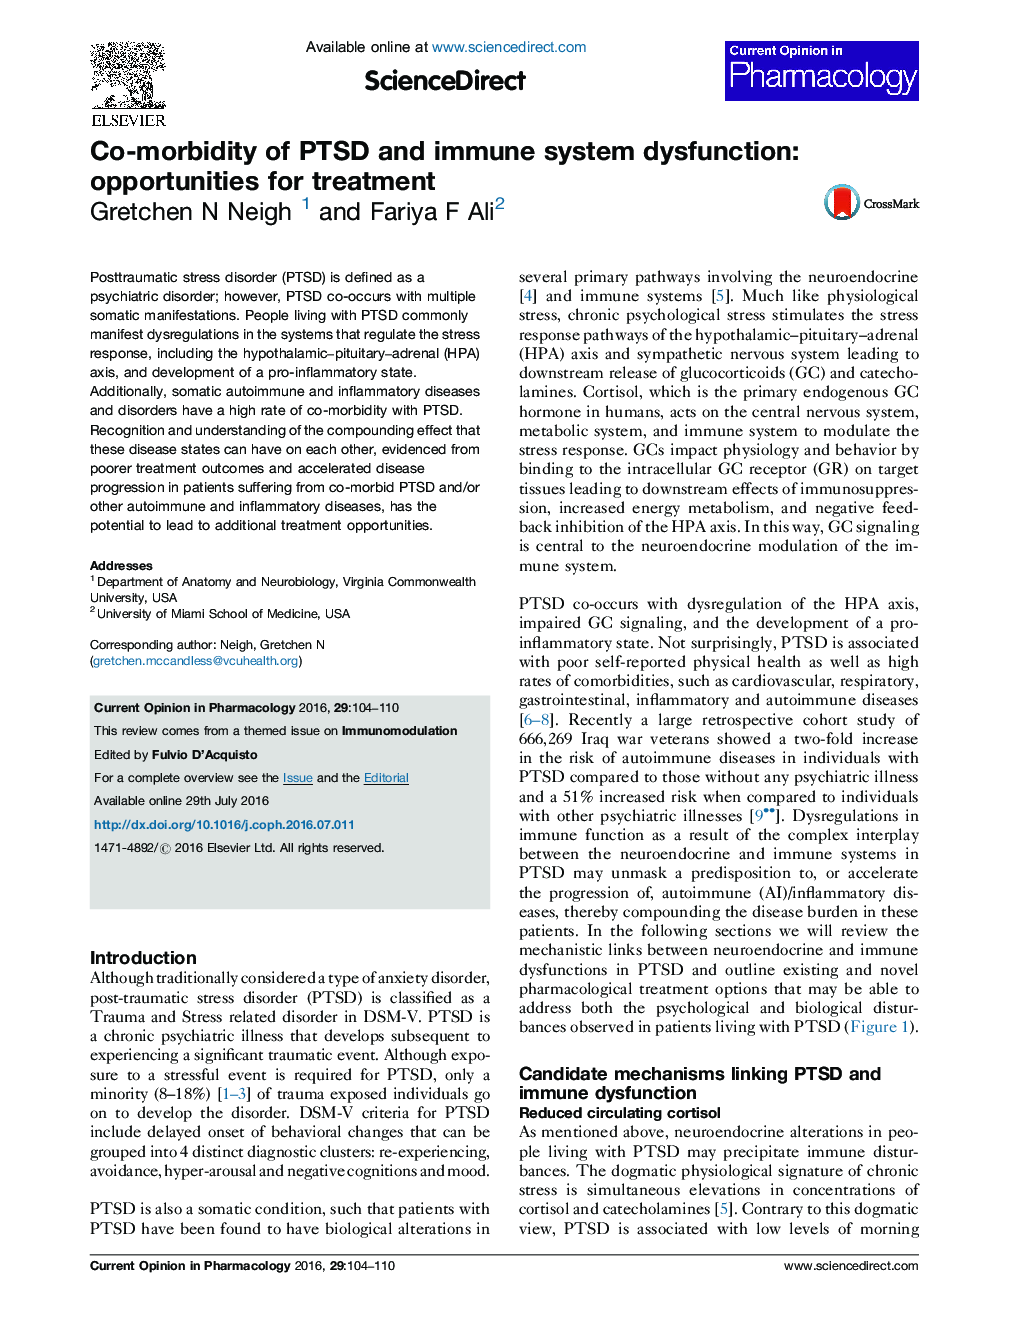 Co-morbidity of PTSD and immune system dysfunction: opportunities for treatment